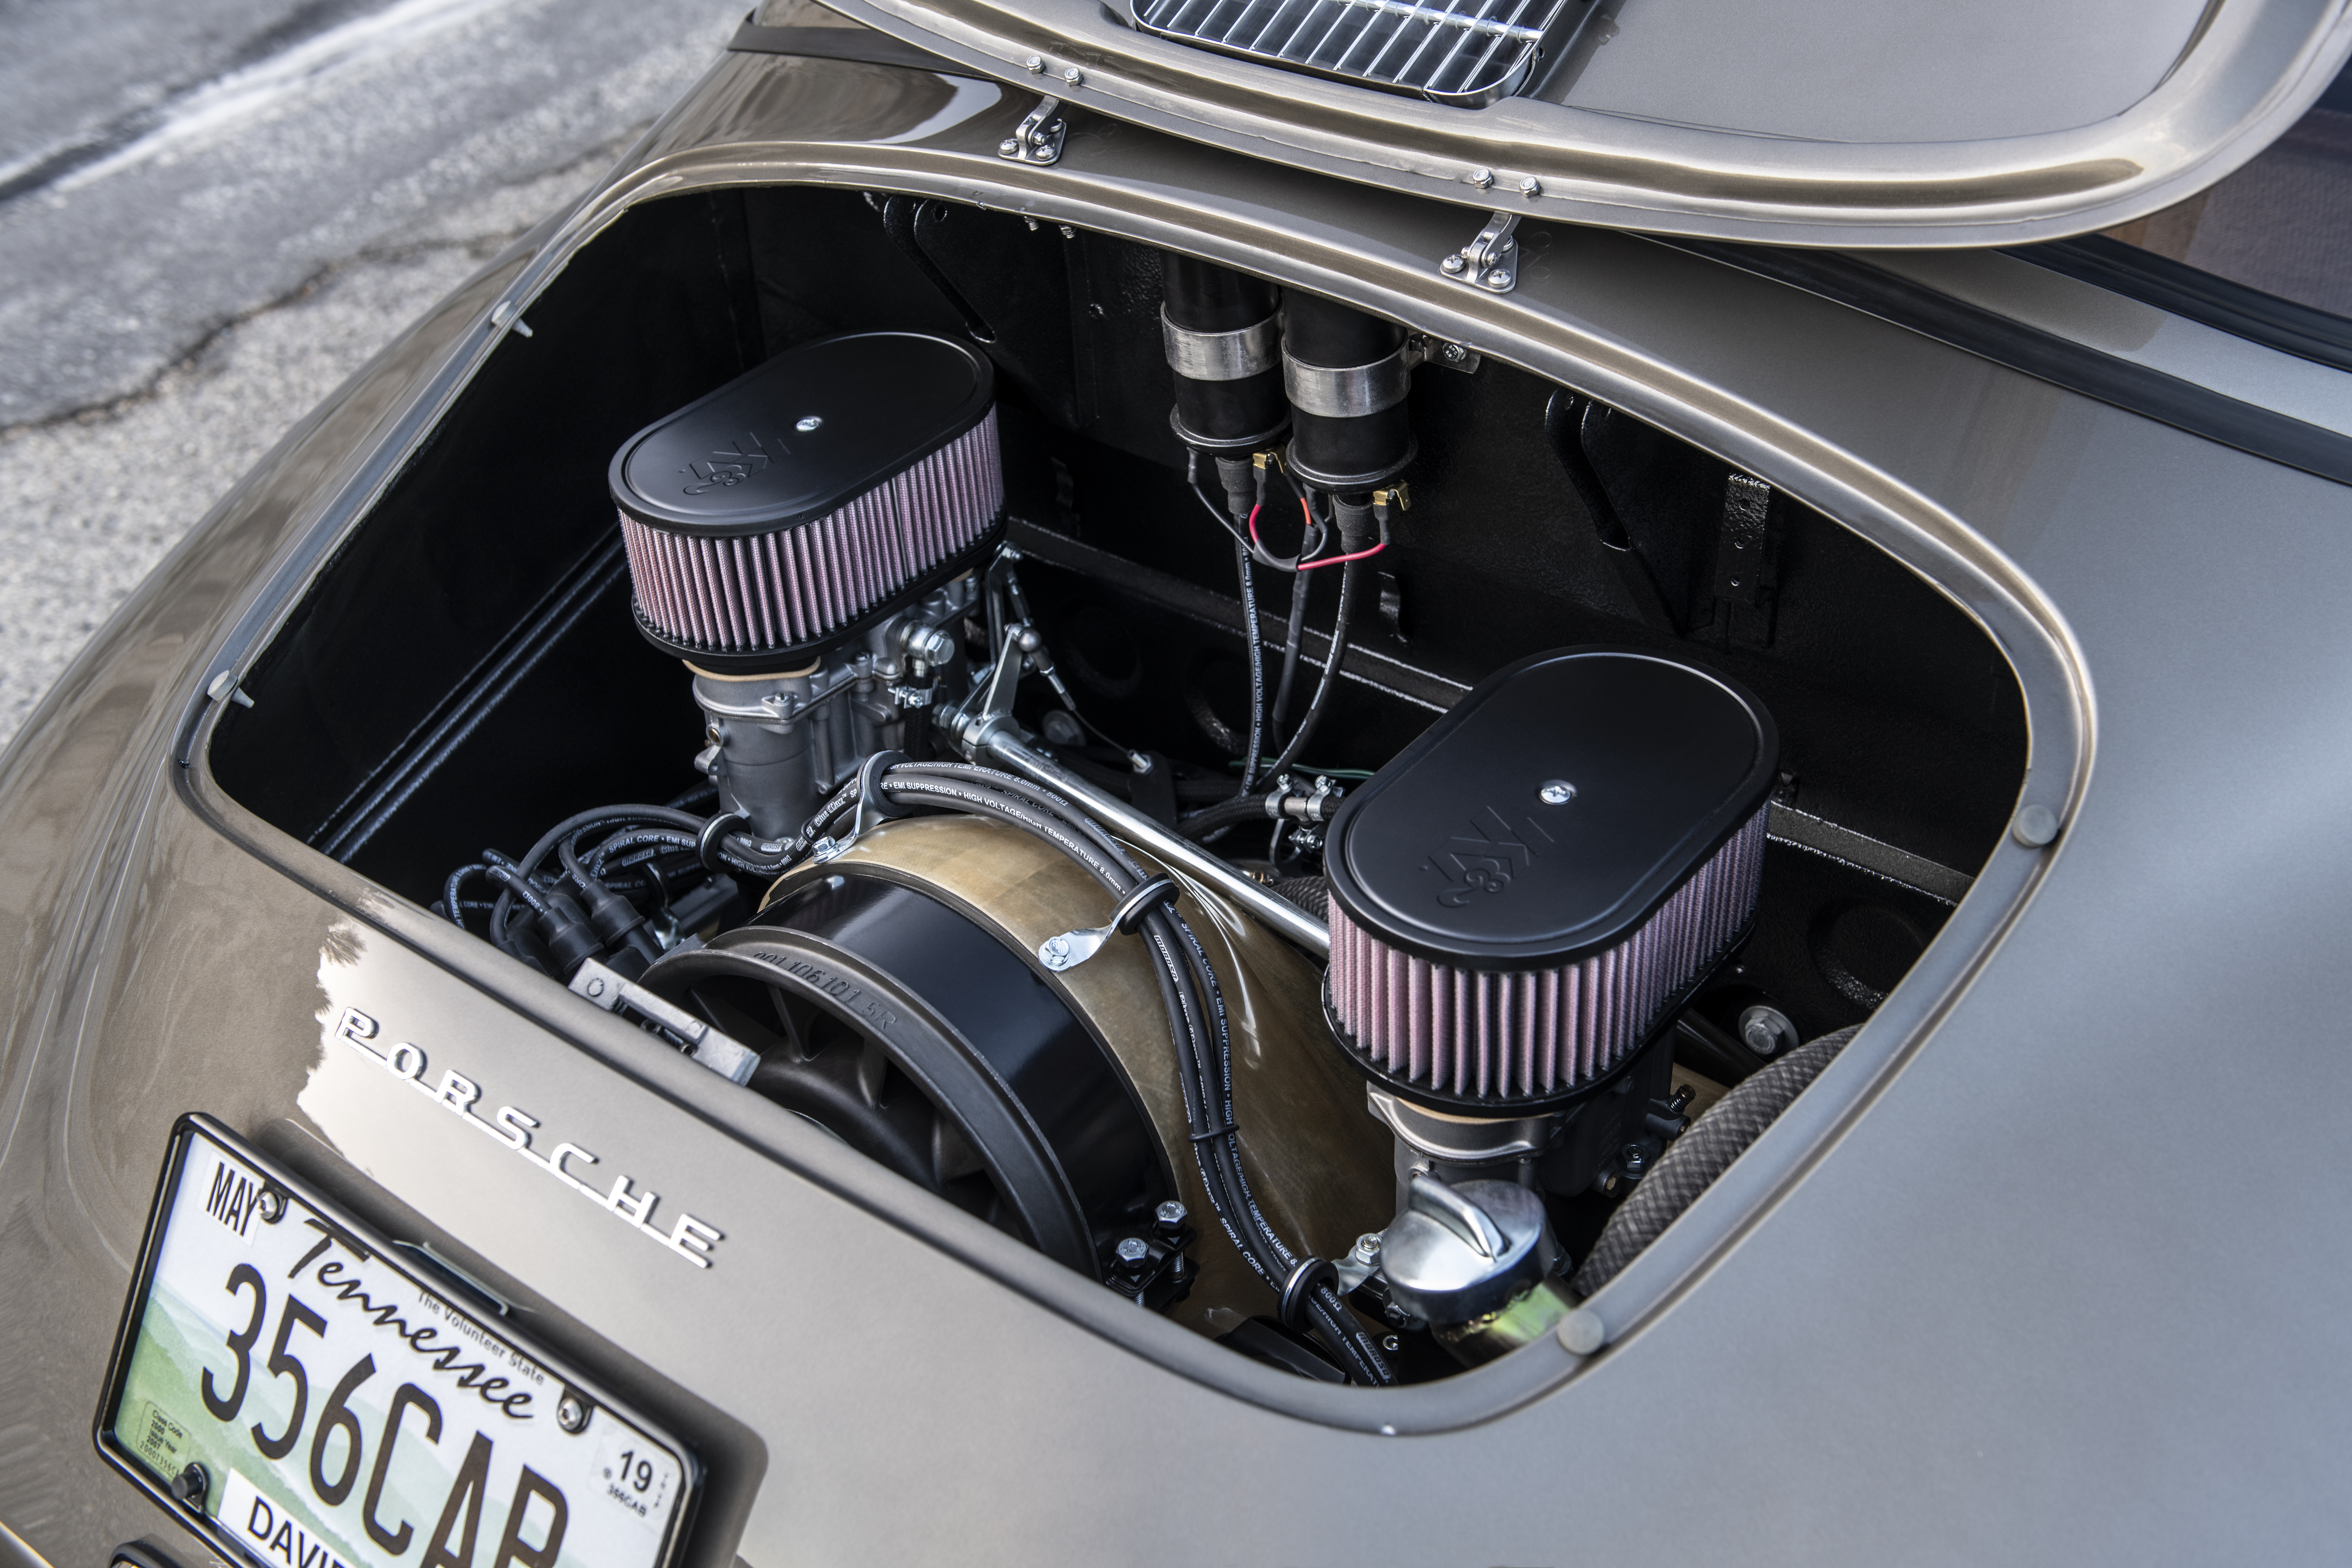 The Outlaw engine will easily propel the 1,850-pound car. | Emory Motorsports photo